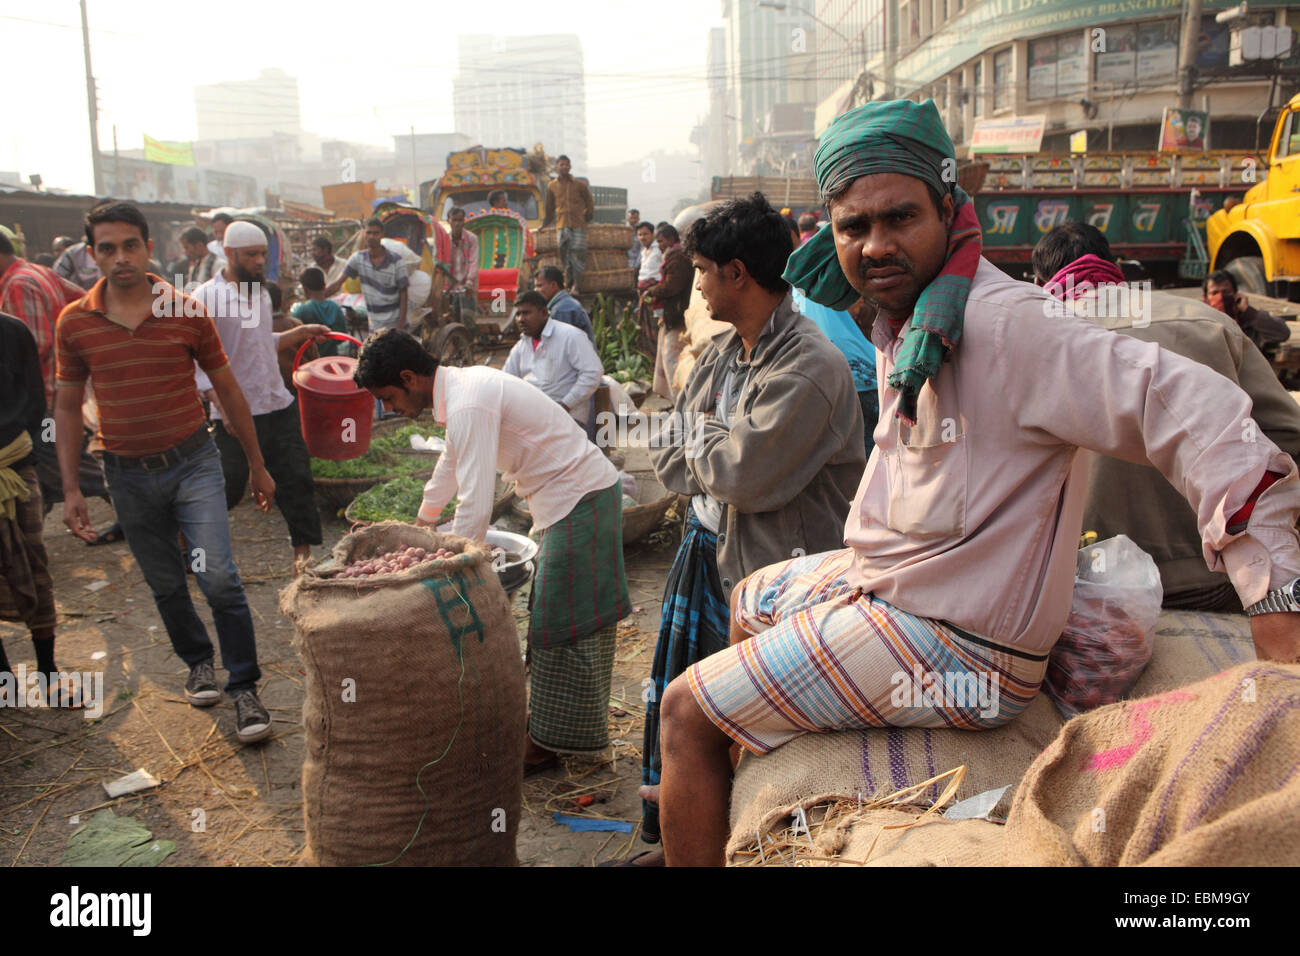 People at the market at Gulshan in Dhaka, Bangladesh. Fruit and vegetables are sold wholesale at the market. Stock Photo